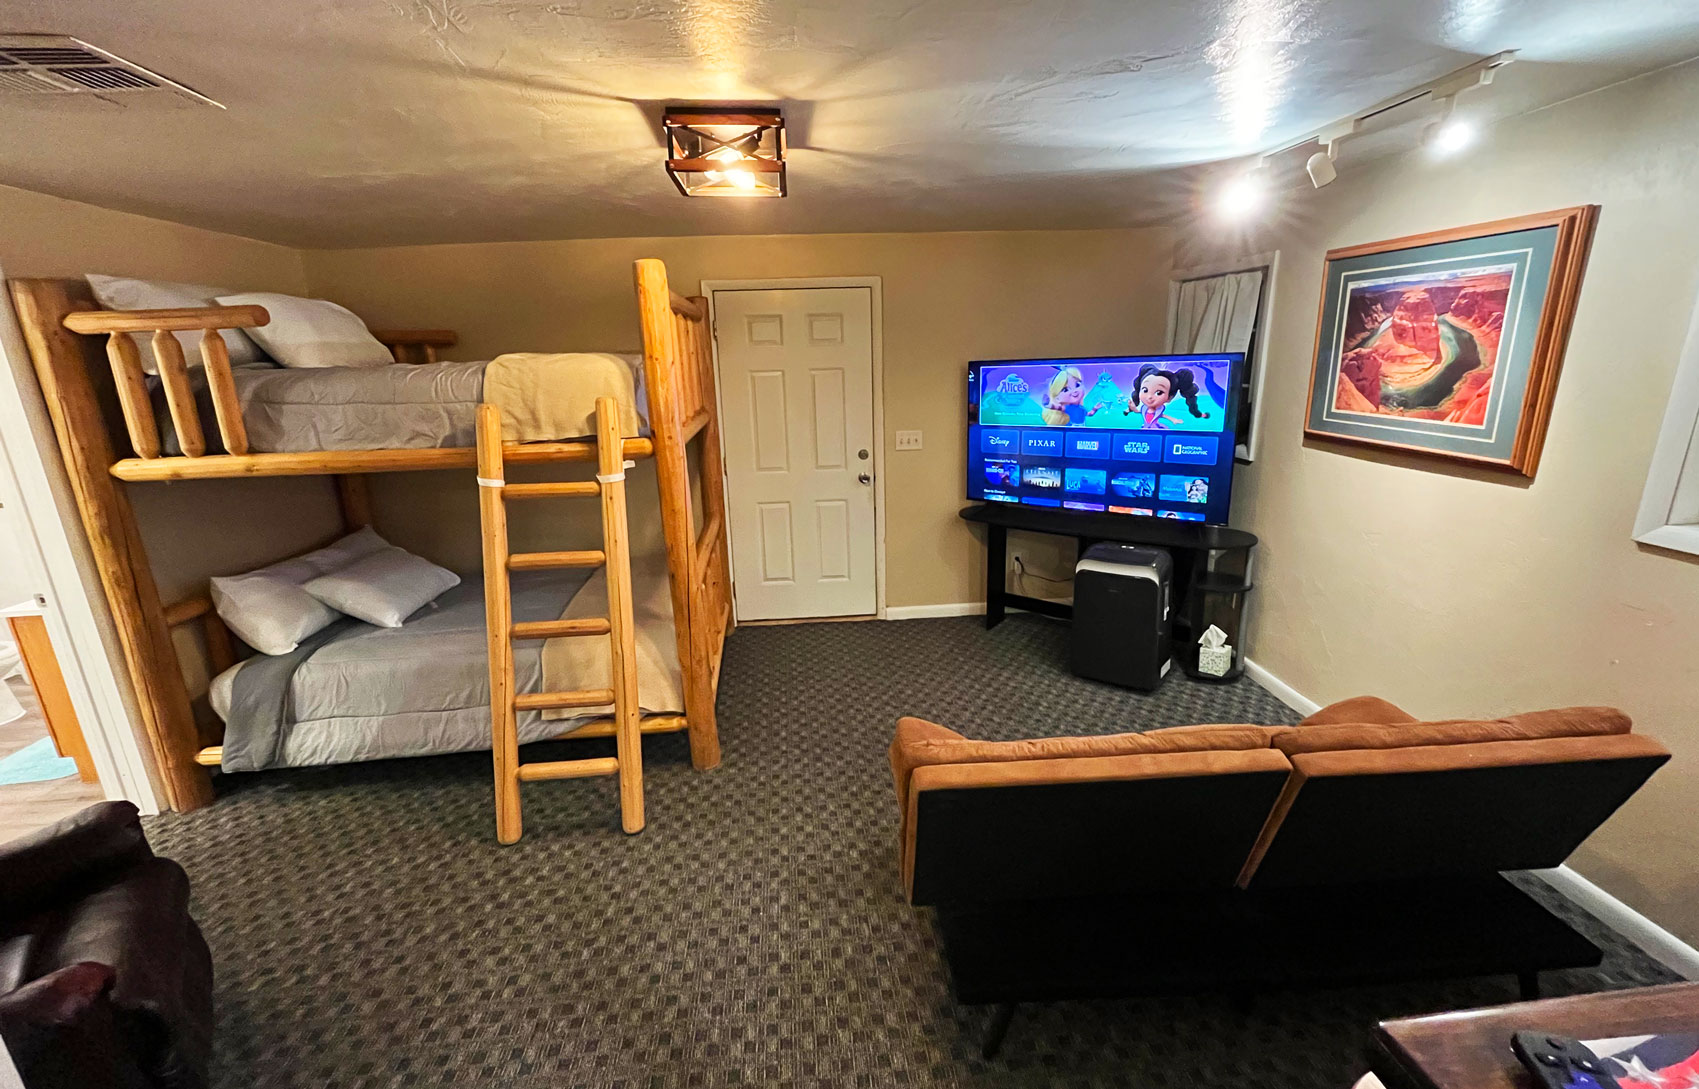 Vacation Suite at the Paiute Trails Inn